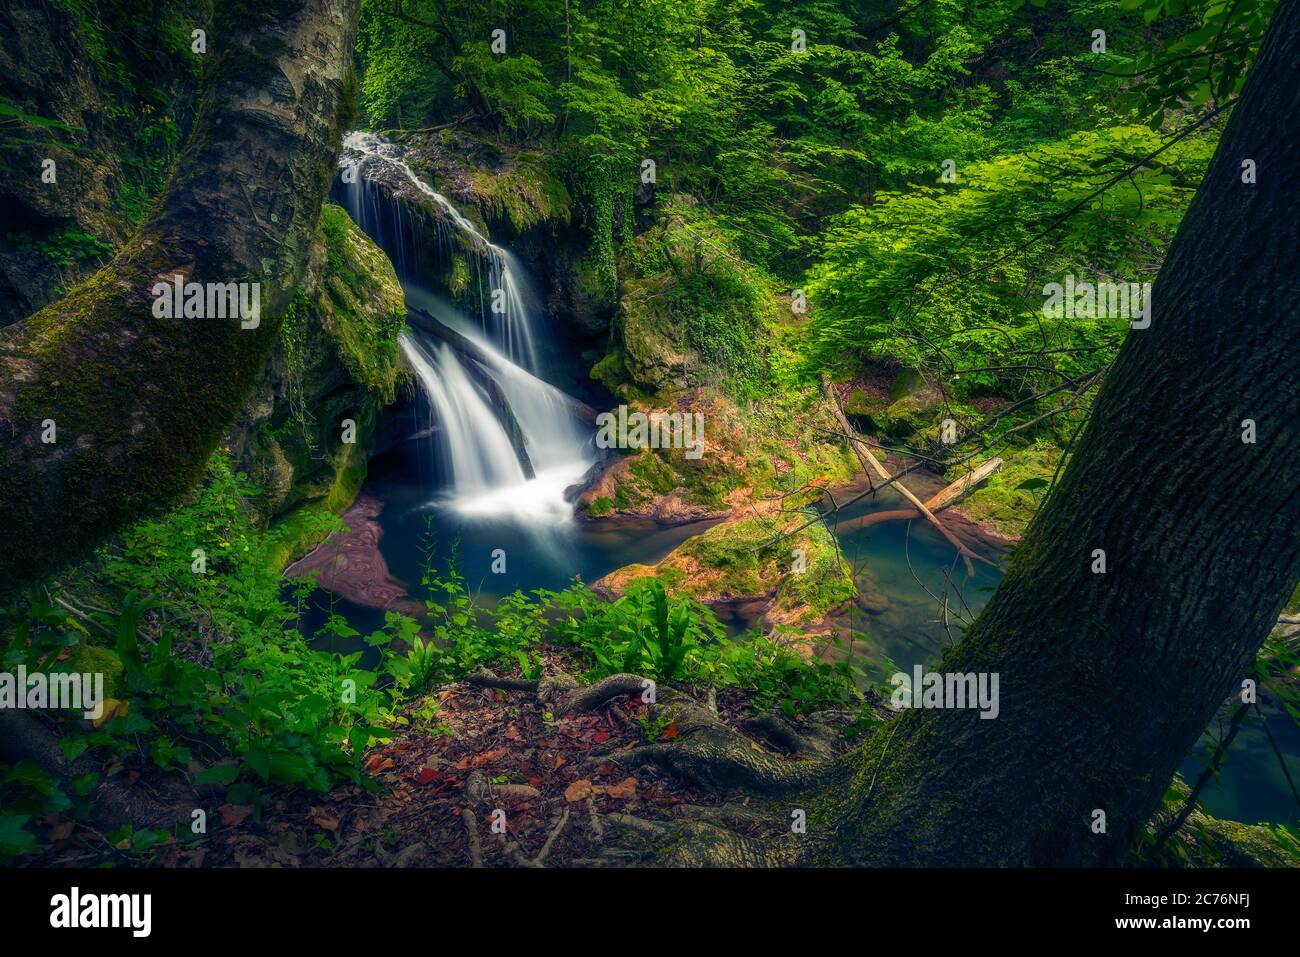 Vaioaga waterfall big waterfall in Nera gorges Cheile Nerei in Romania framed between two trees Stock Photo